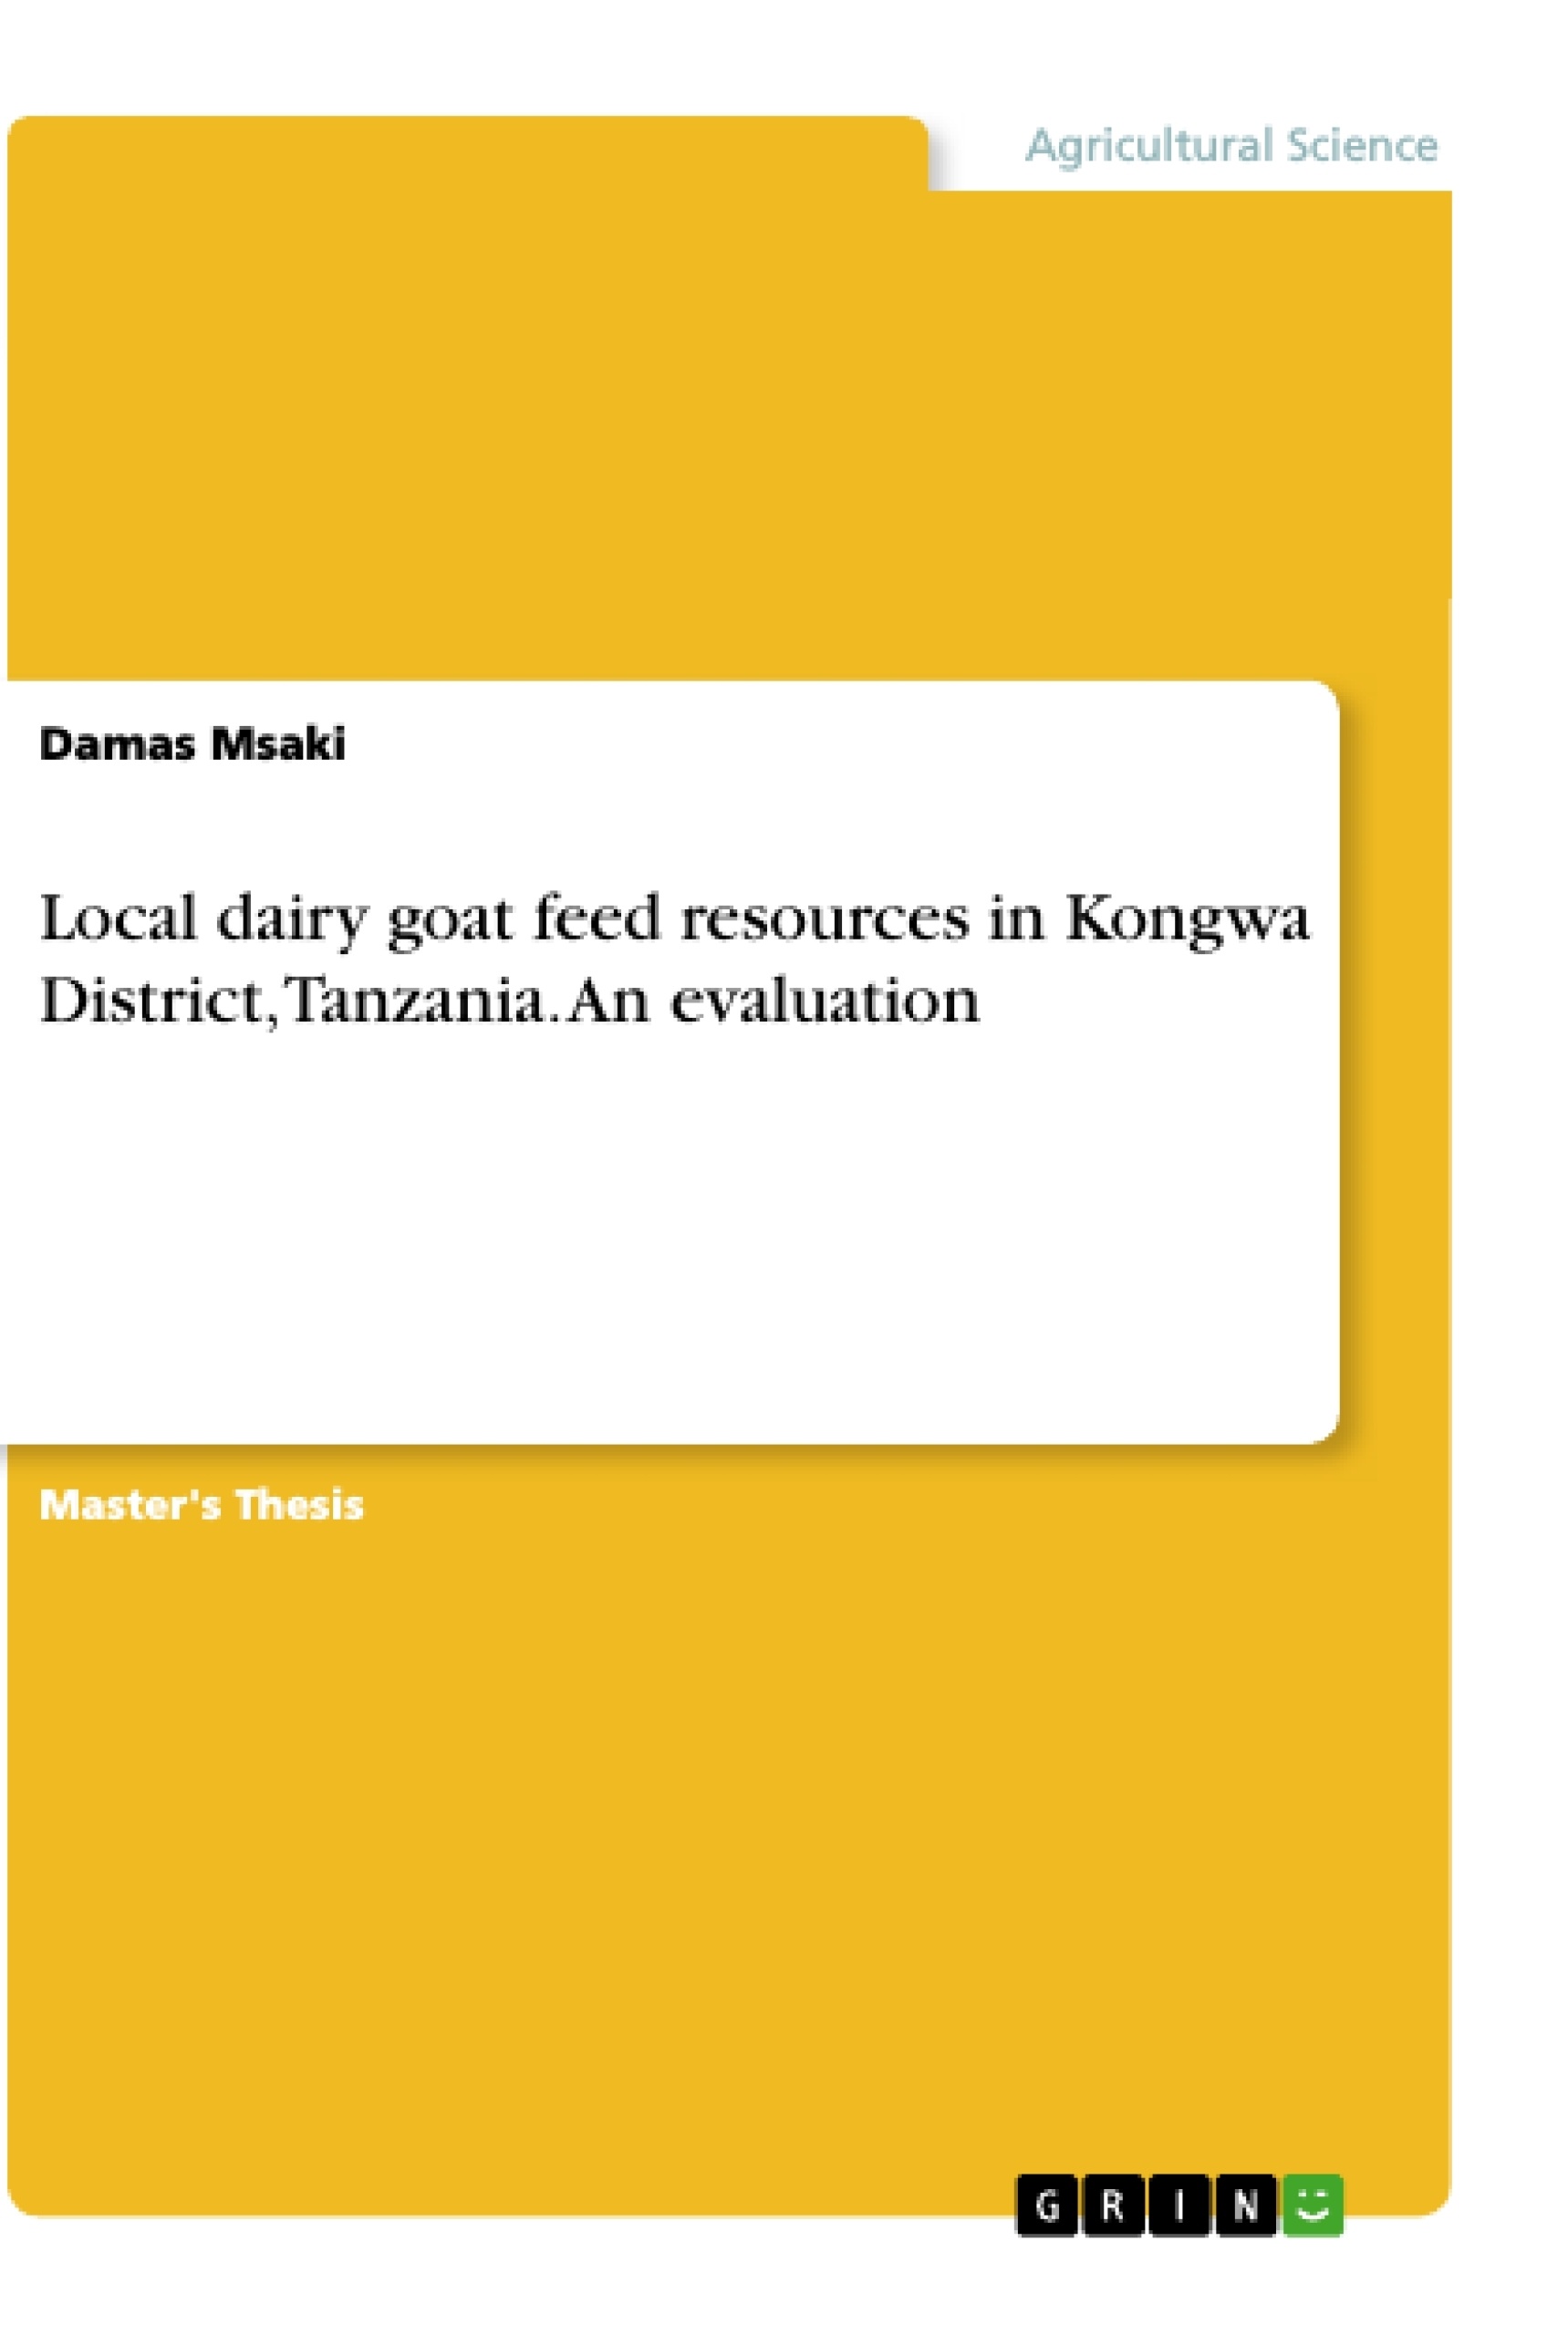 Title: Local dairy goat feed resources in Kongwa District, Tanzania. An evaluation